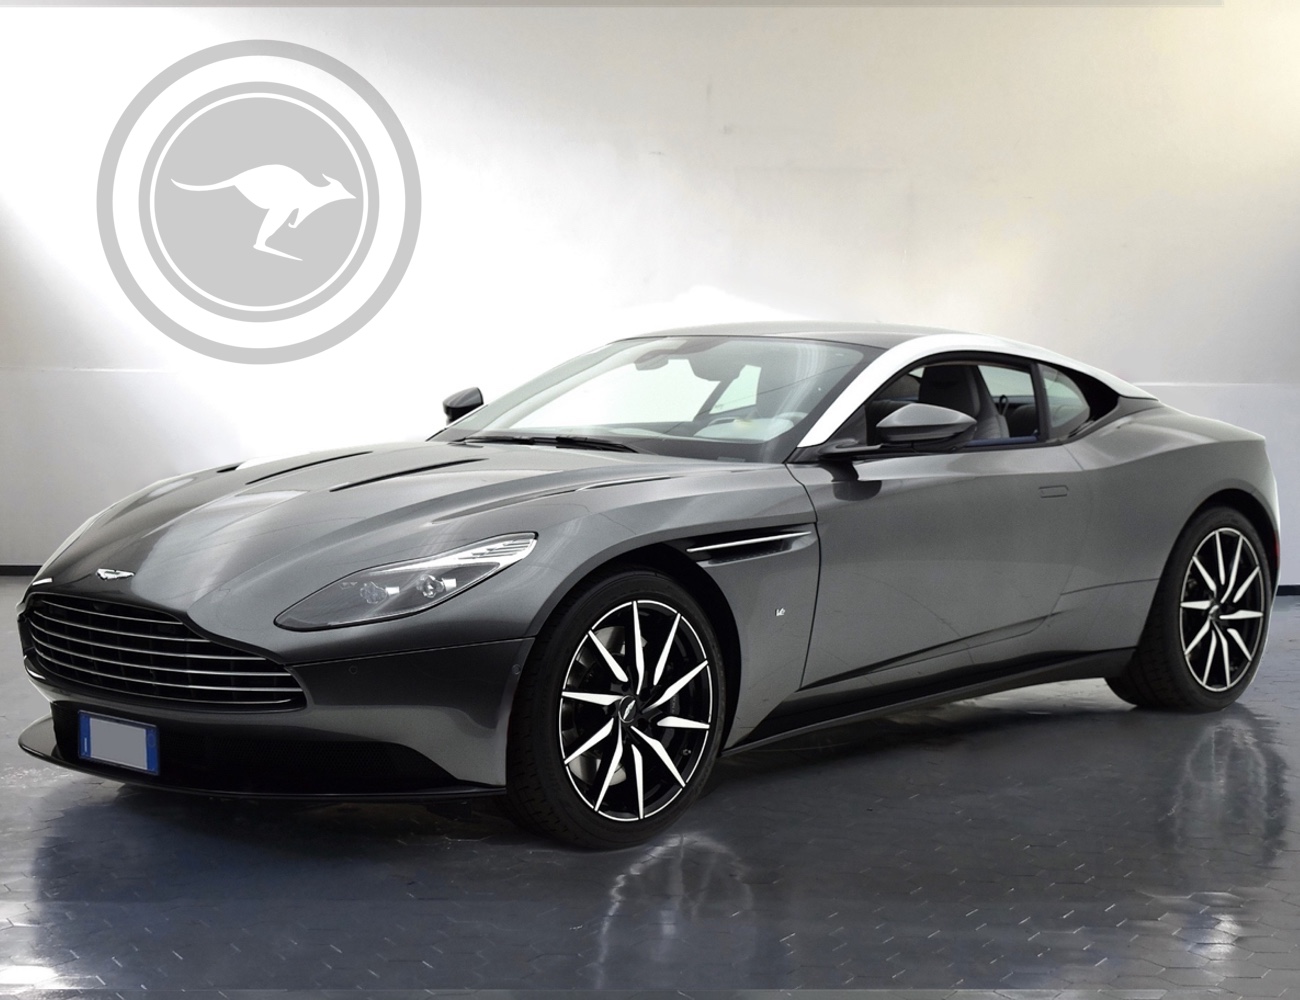 Aston Martin DB11 for rent, find out